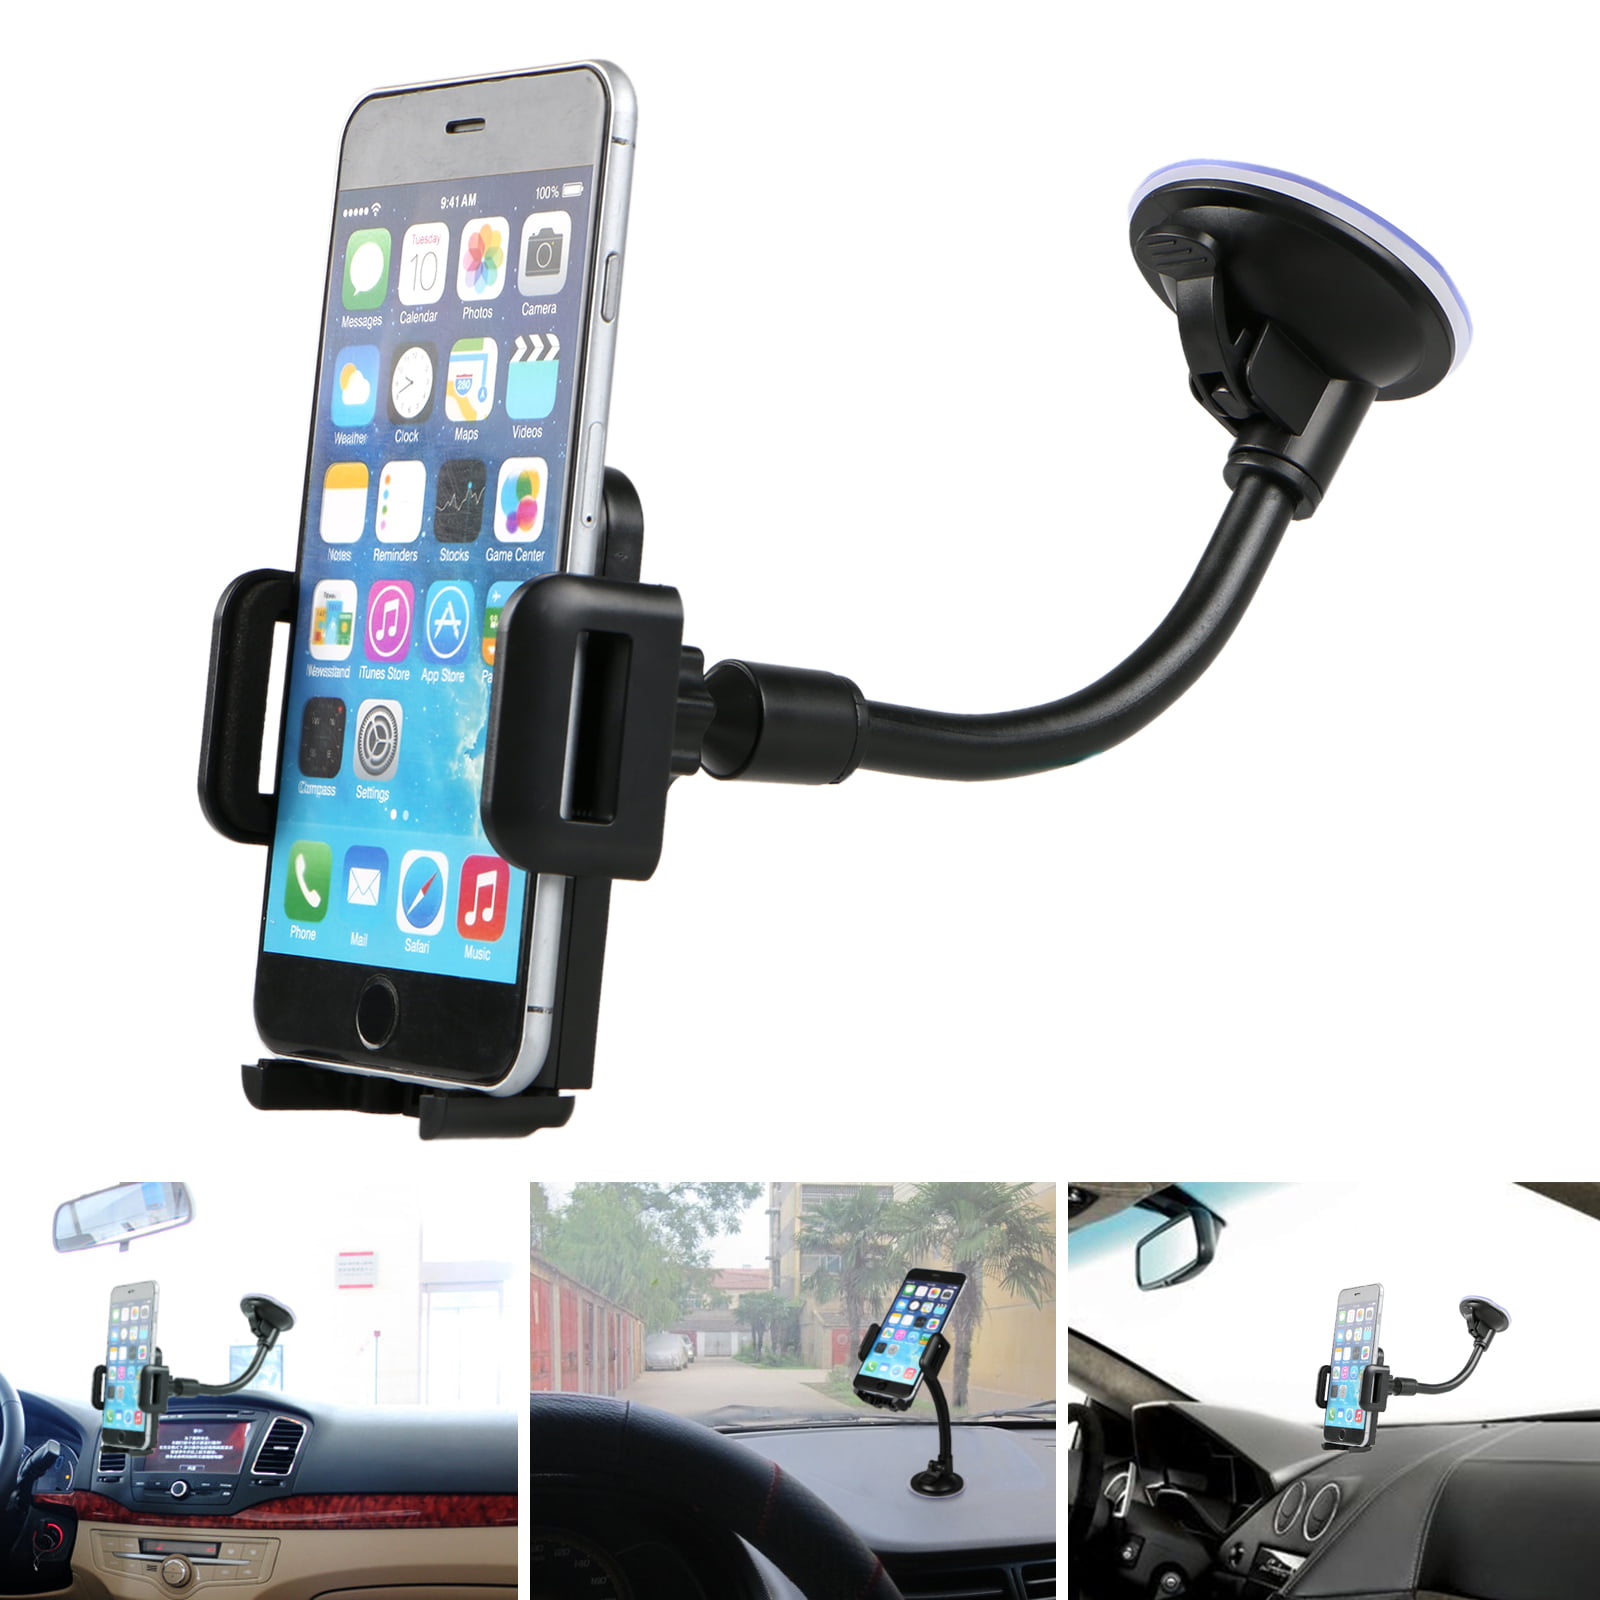 Strong Sticky Gel Suction Cup Phone Holder for Car Dashboard Windshield 360 ° Rotatable Long Arm Cell Phone Holder for All Mobile Phones from 4.0-7.0 inches Car Phone Mount